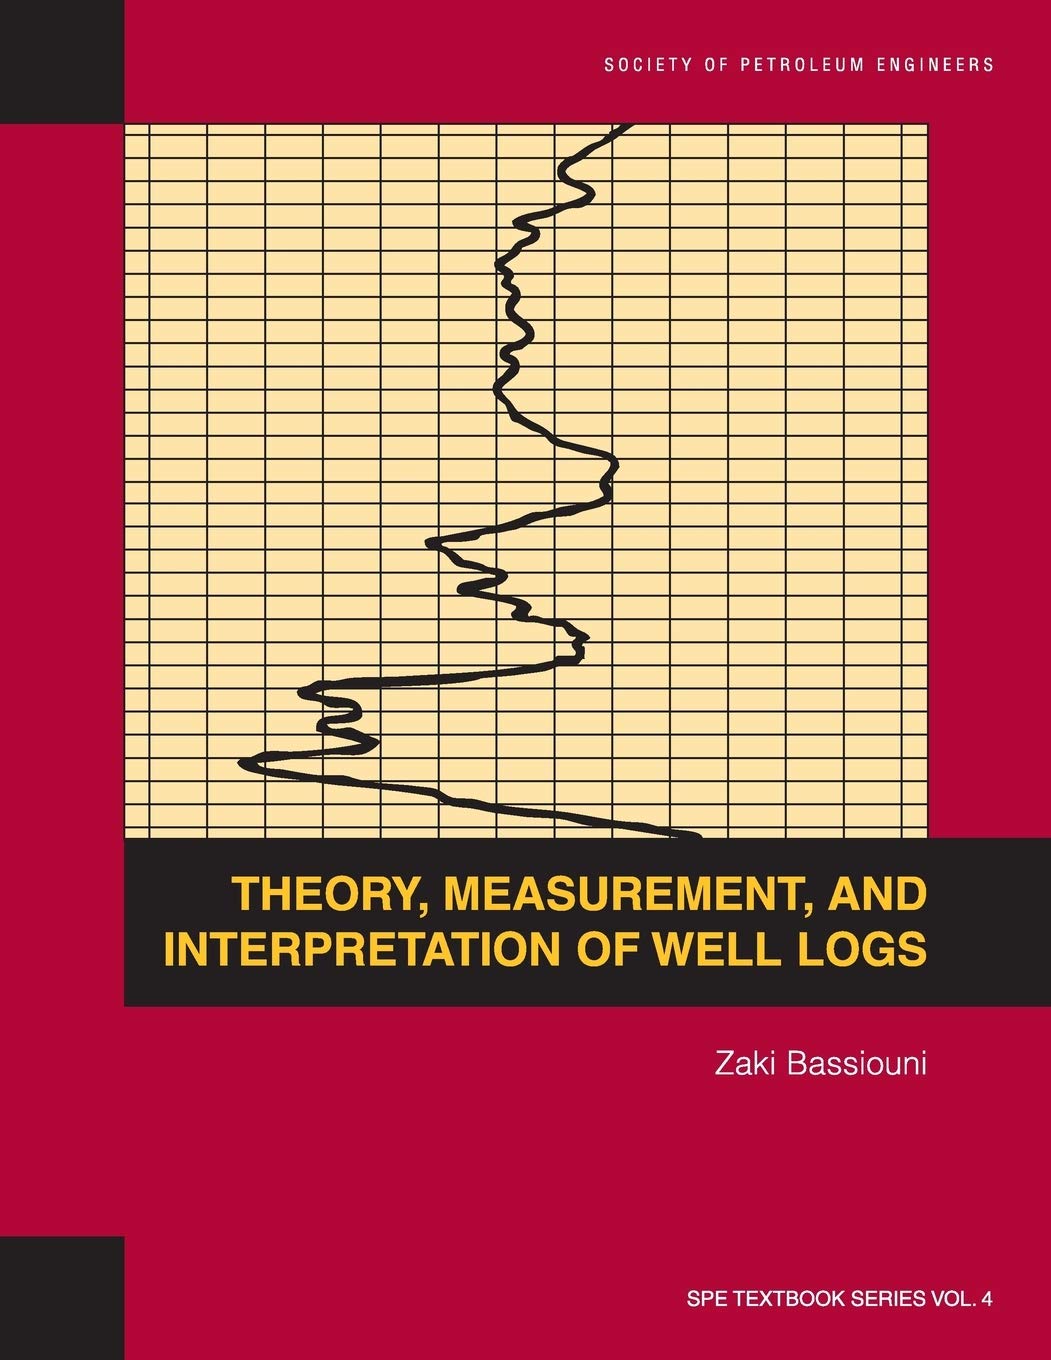 Theory, Measurement, and Interpretation of Well Logs